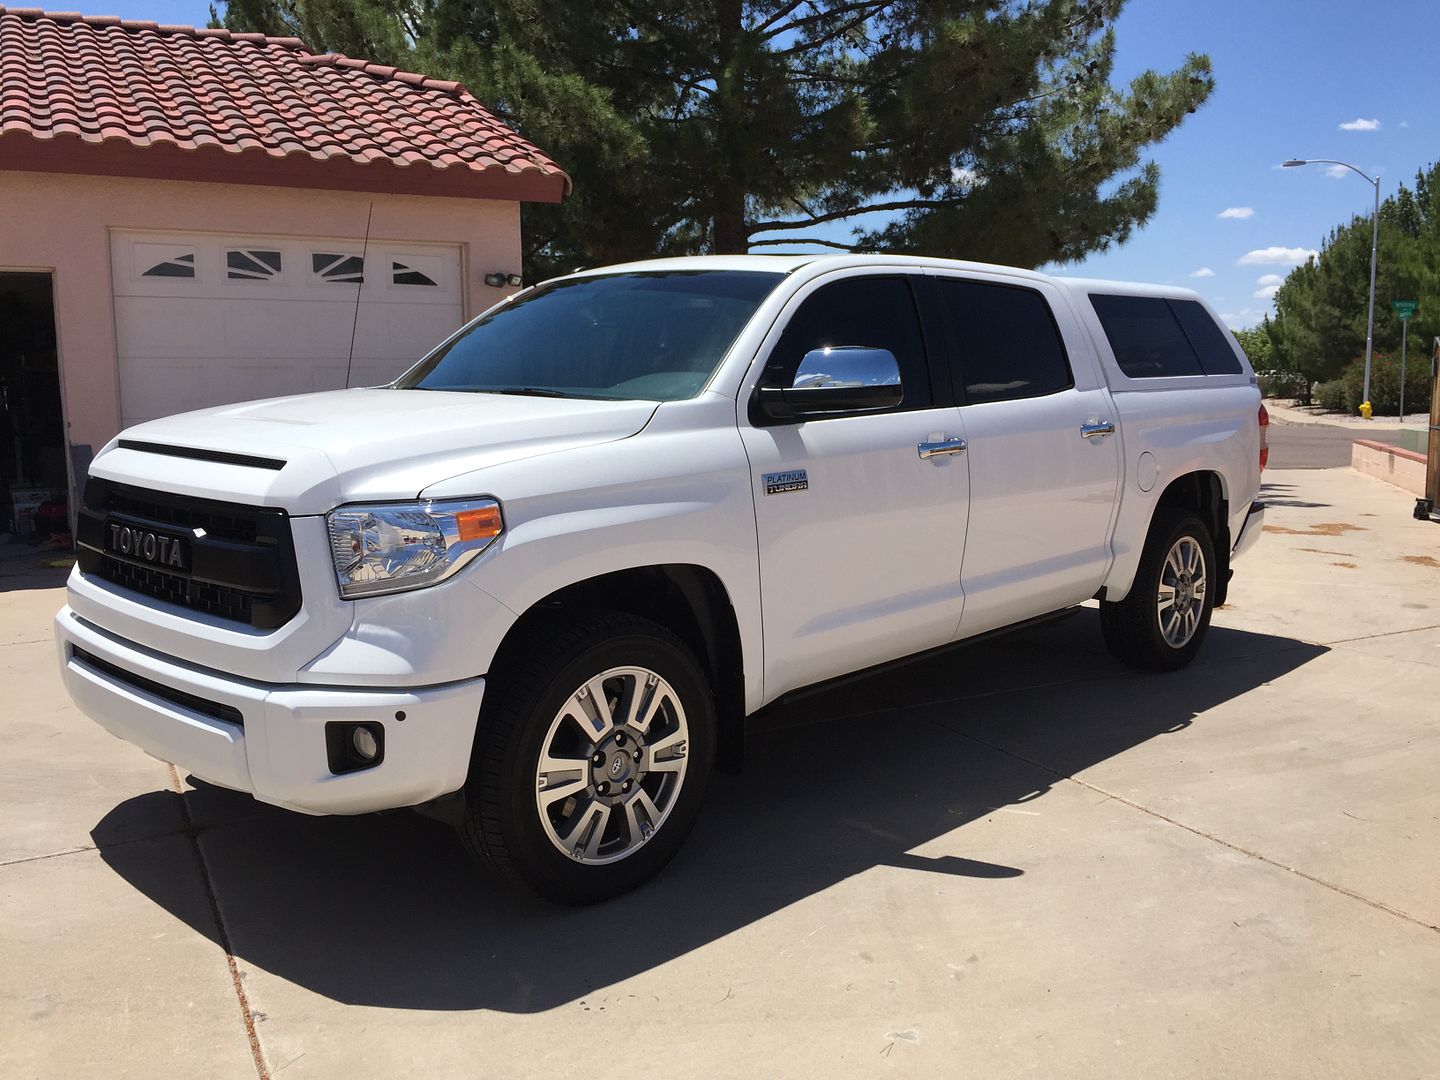 Wikid Tundra | Page 3 | Toyota Tundra Discussion Forum